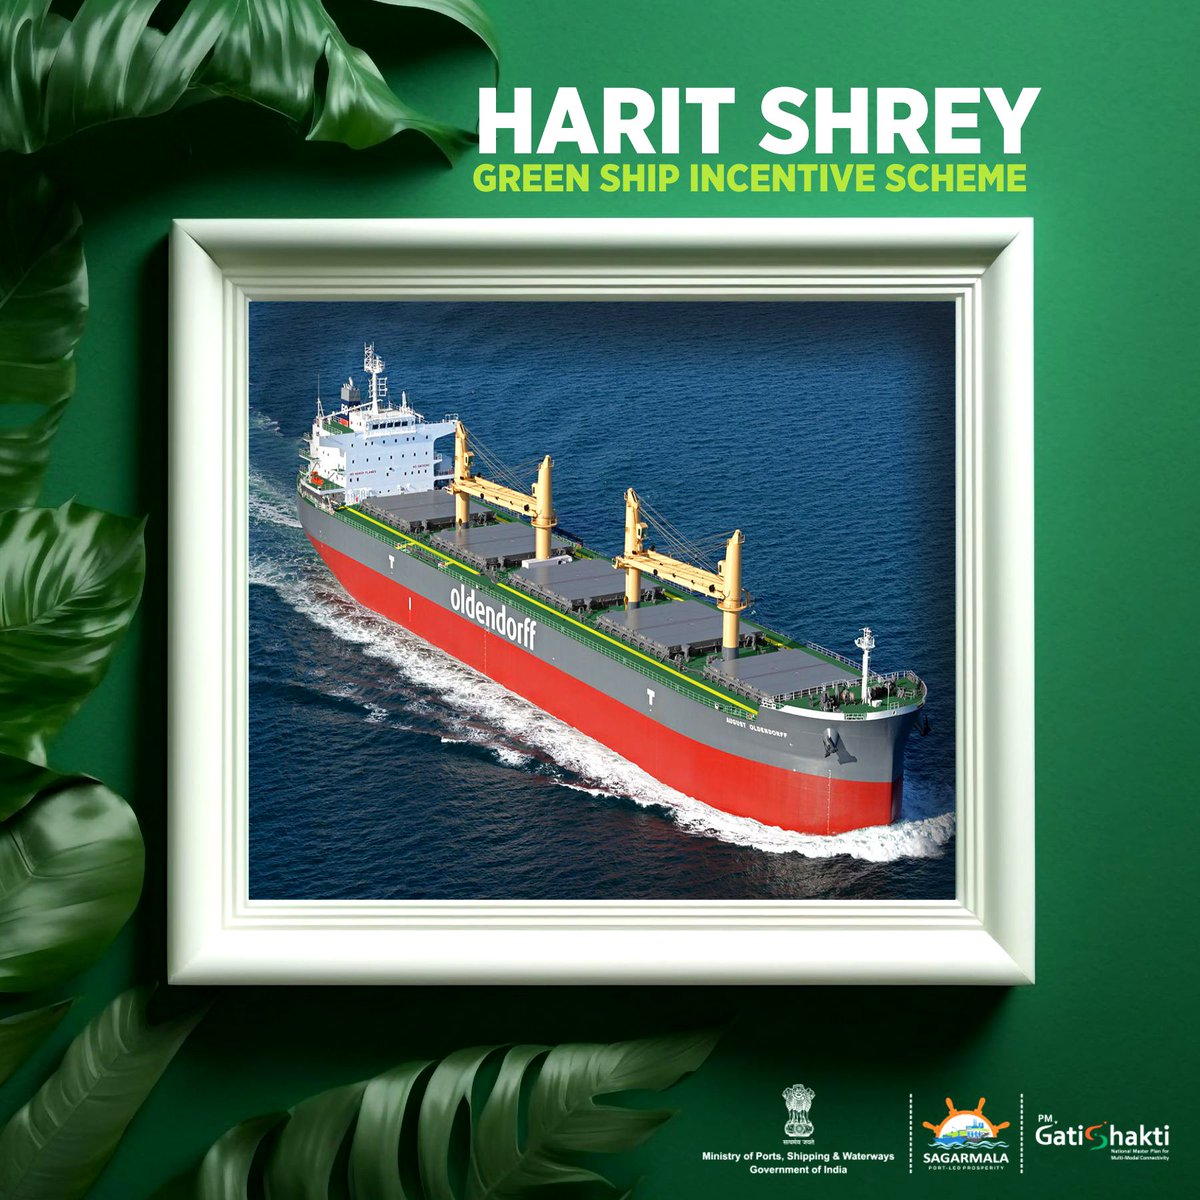 MoPSW's 'Harit Shrey' scheme offers incentives to ships with good Environmental Ship Index (ESI) score. The aim is to promote green initiatives and improve sustainability of port operations. M.V August Oldendorff was the first ship to receive the green incentive. @VesselFinder